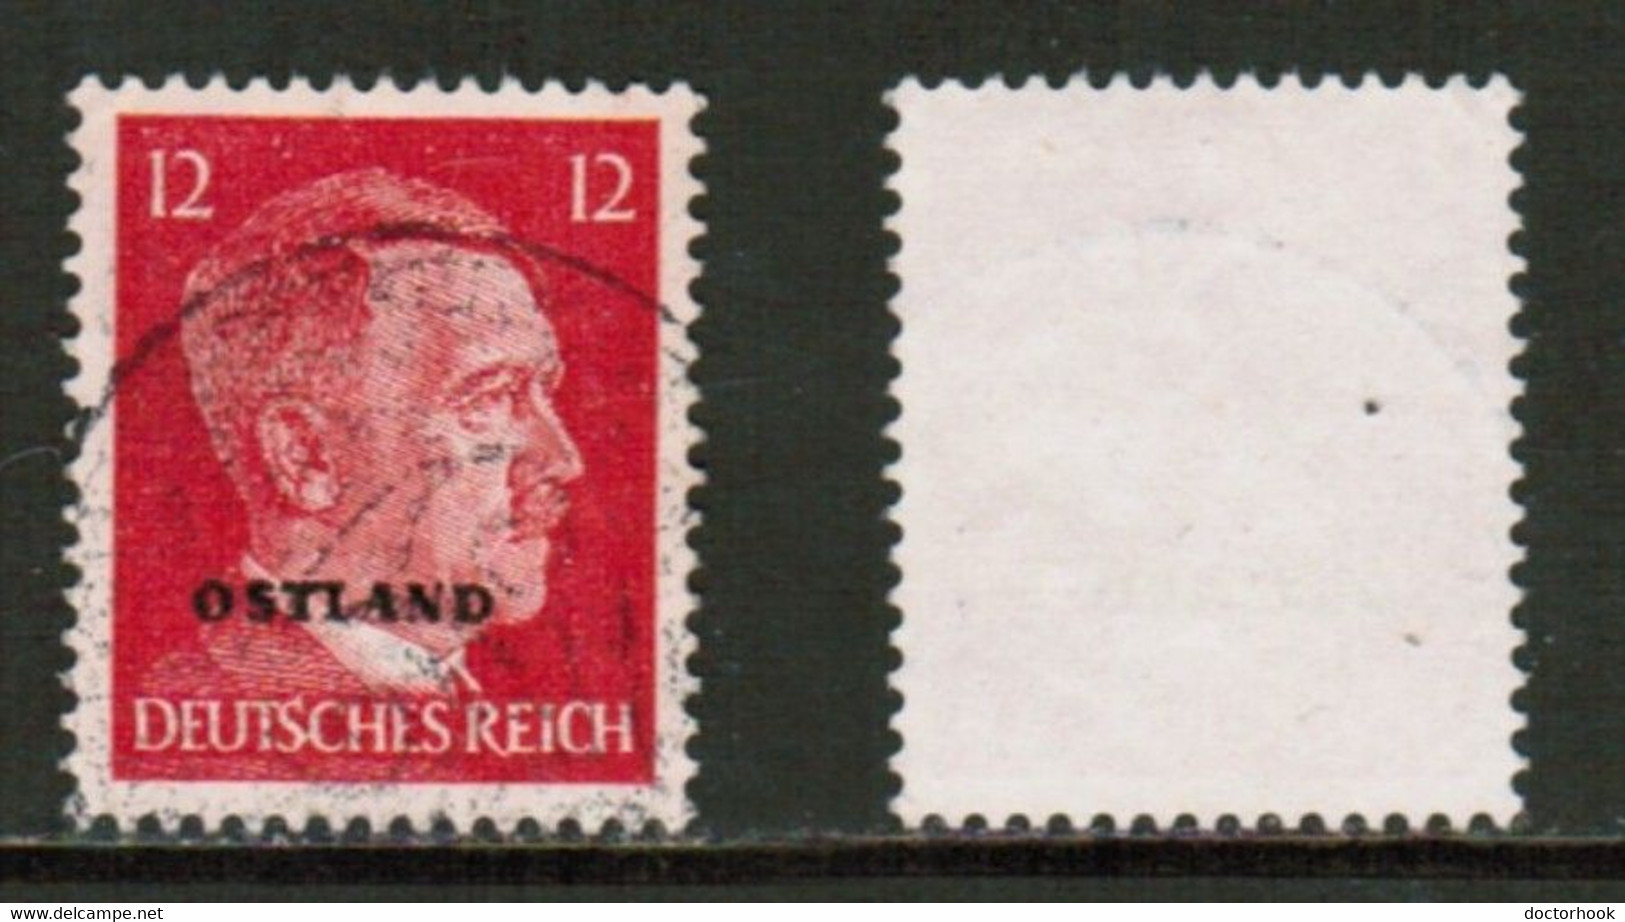 RUSSIA---German Occupation   Scott # N 16 USED (CONDITION AS PER SCAN) (Stamp Scan # 847-6) - 1941-43 Occupazione Tedesca